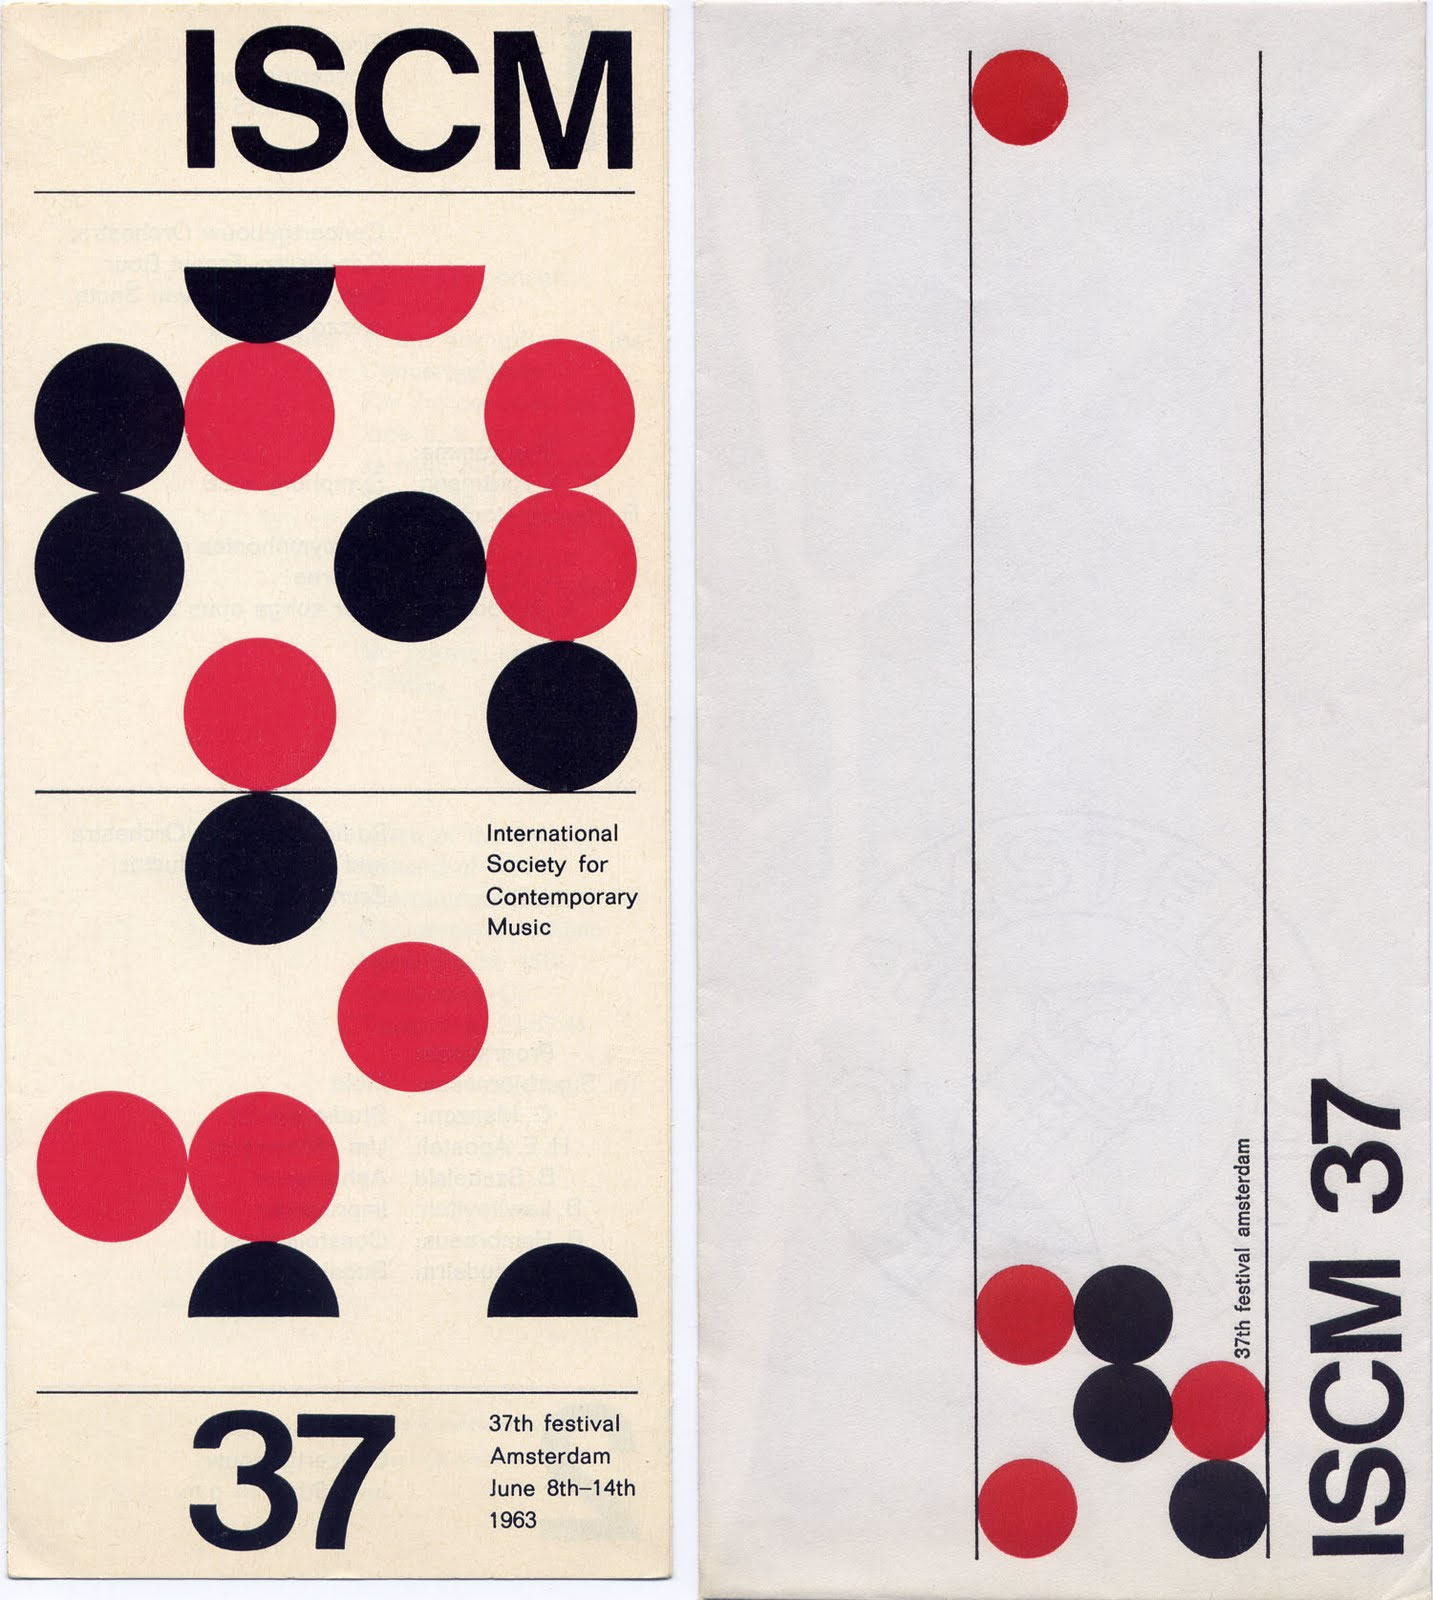 Wim Crouwel: International Society for Contemporary Music ISCM. 1963